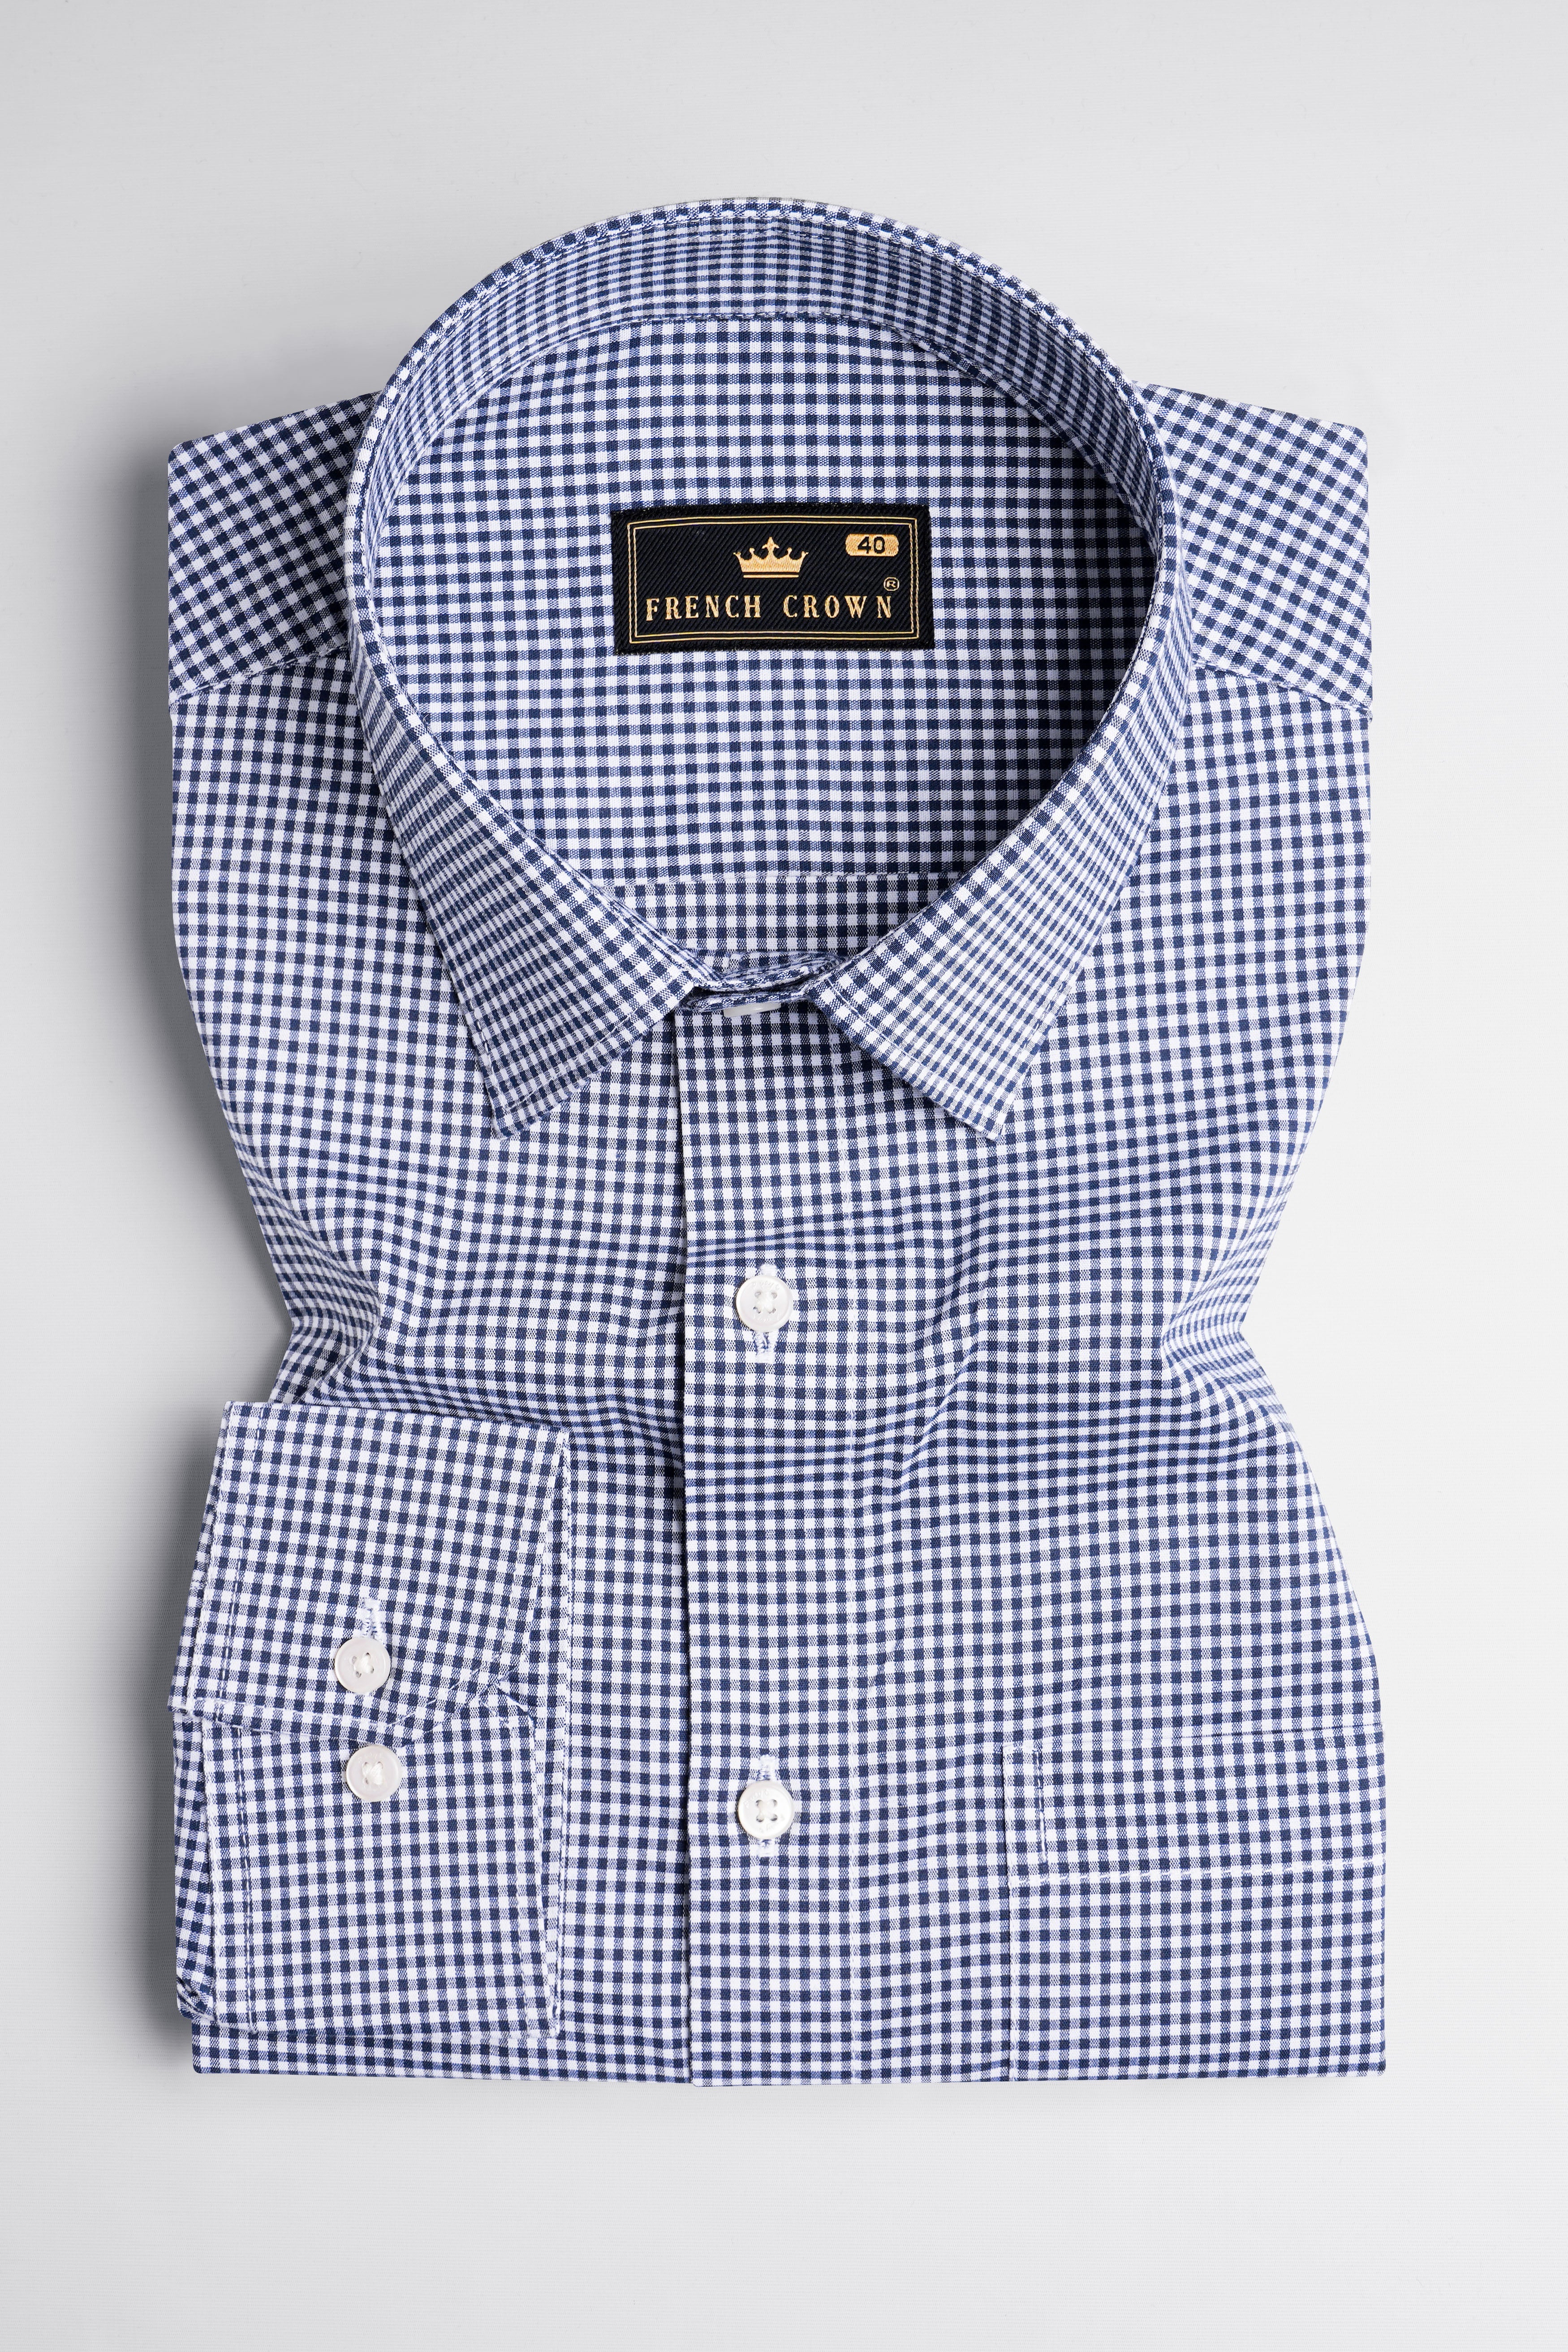 Cloud Burst Blue and White Gingham Checkered Royal Oxford Shirt